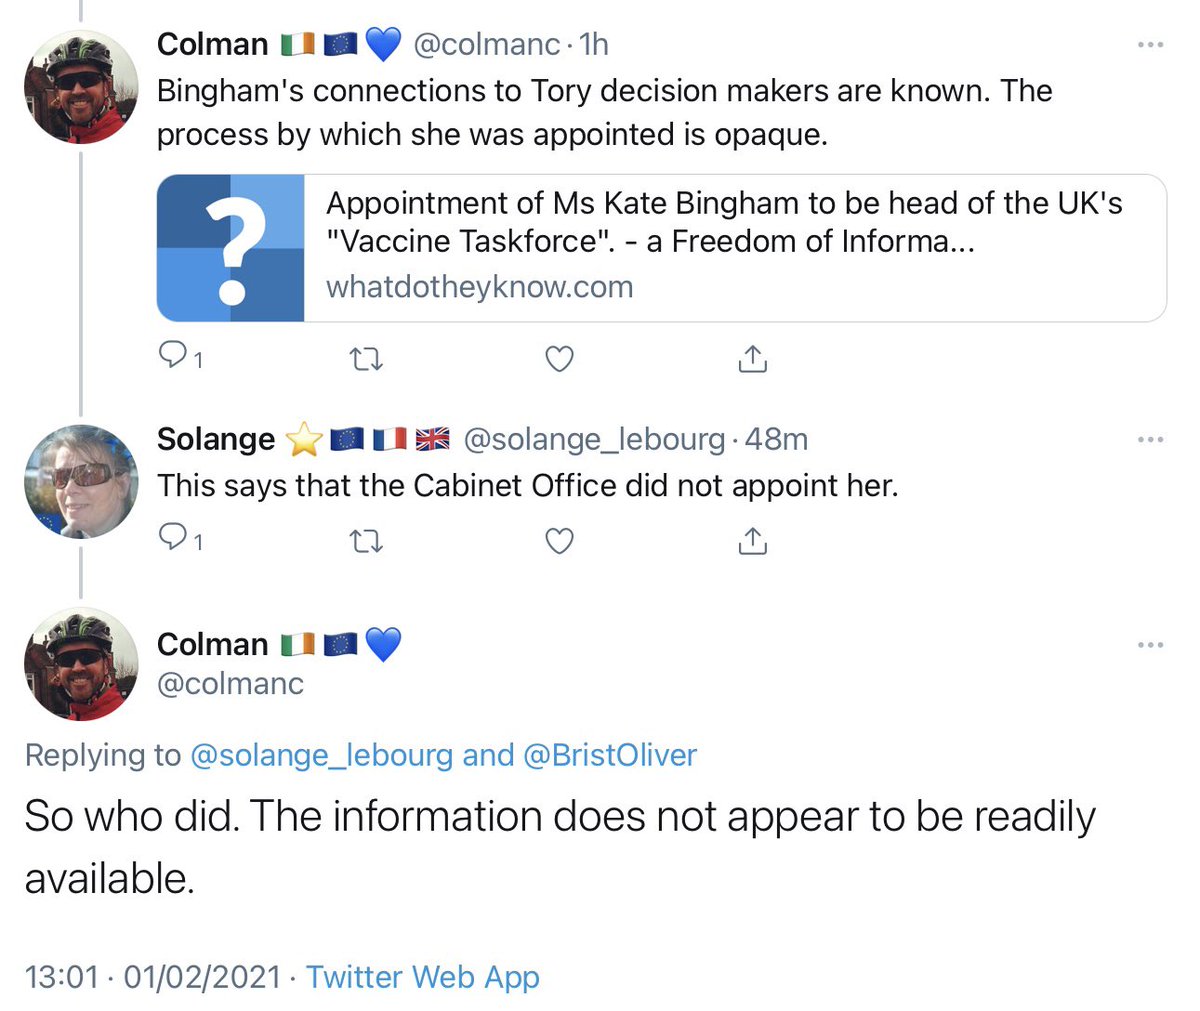 Next, a man complains that the information about Kate Bingham’s appointment “does not appear to be readily available” after a FOI request to the Cabinet Office drew a blank.The information was readily available on  http://gov.uk  on 16 May 2020 https://www.gov.uk/government/news/kate-bingham-appointed-chair-of-uk-vaccine-taskforce